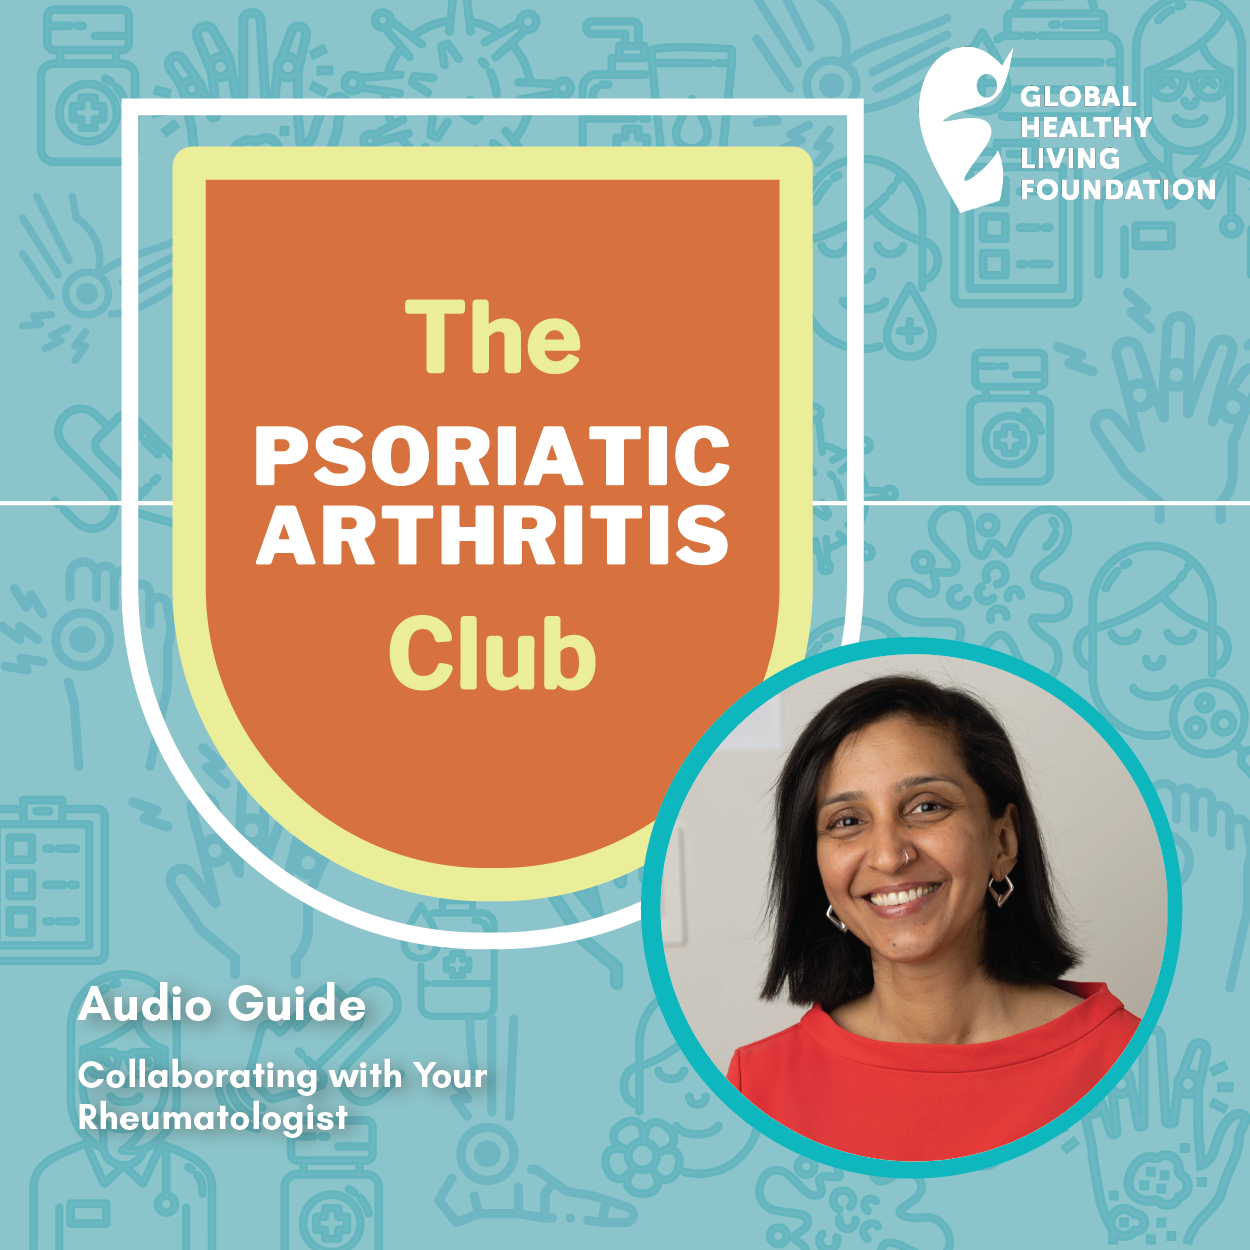 Audio Guide: Collaborating with Your Rheumatologist